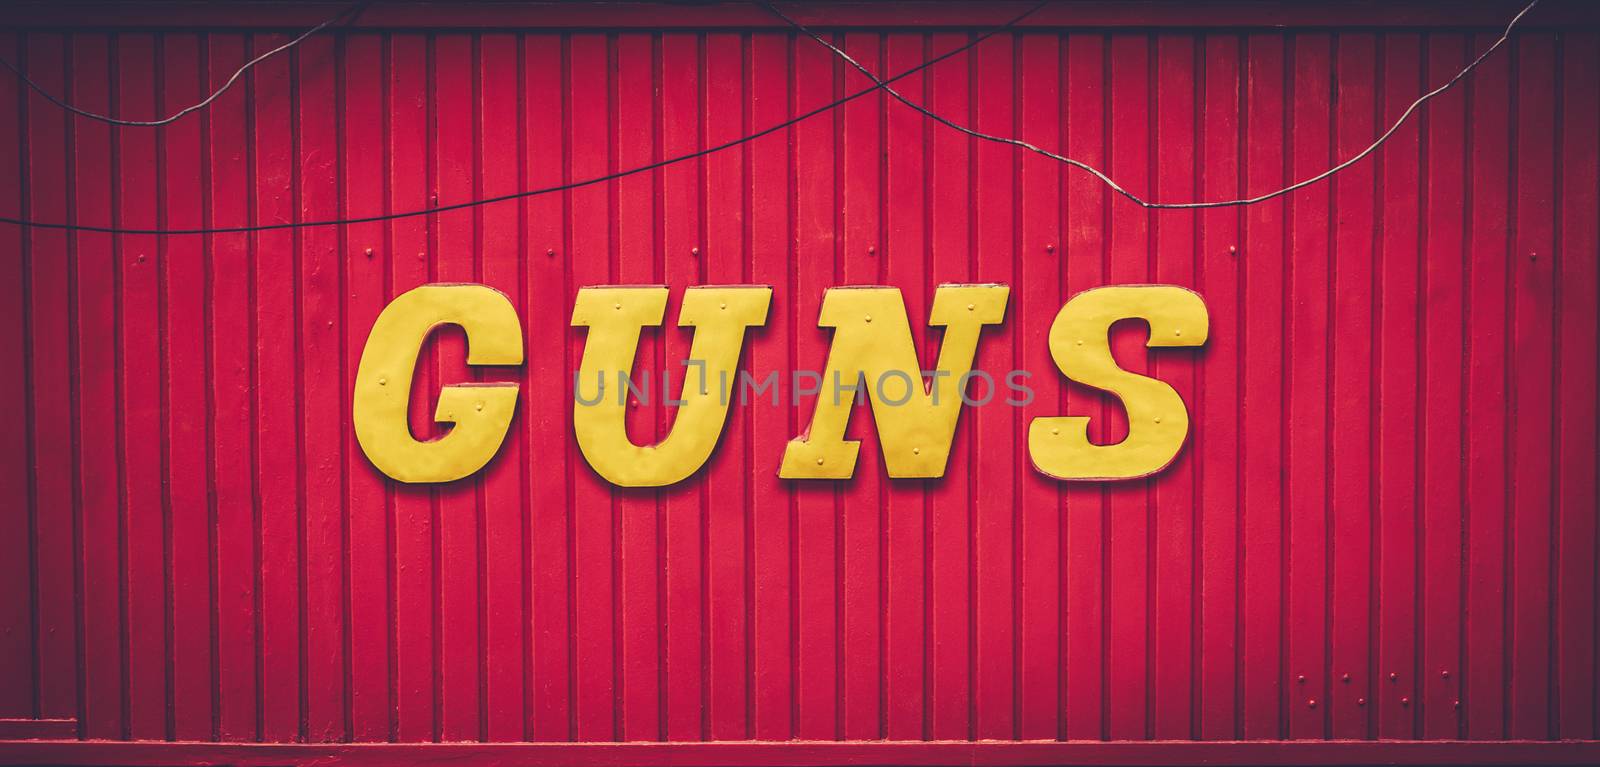 A Retro Red Gun Store Sign In The USA